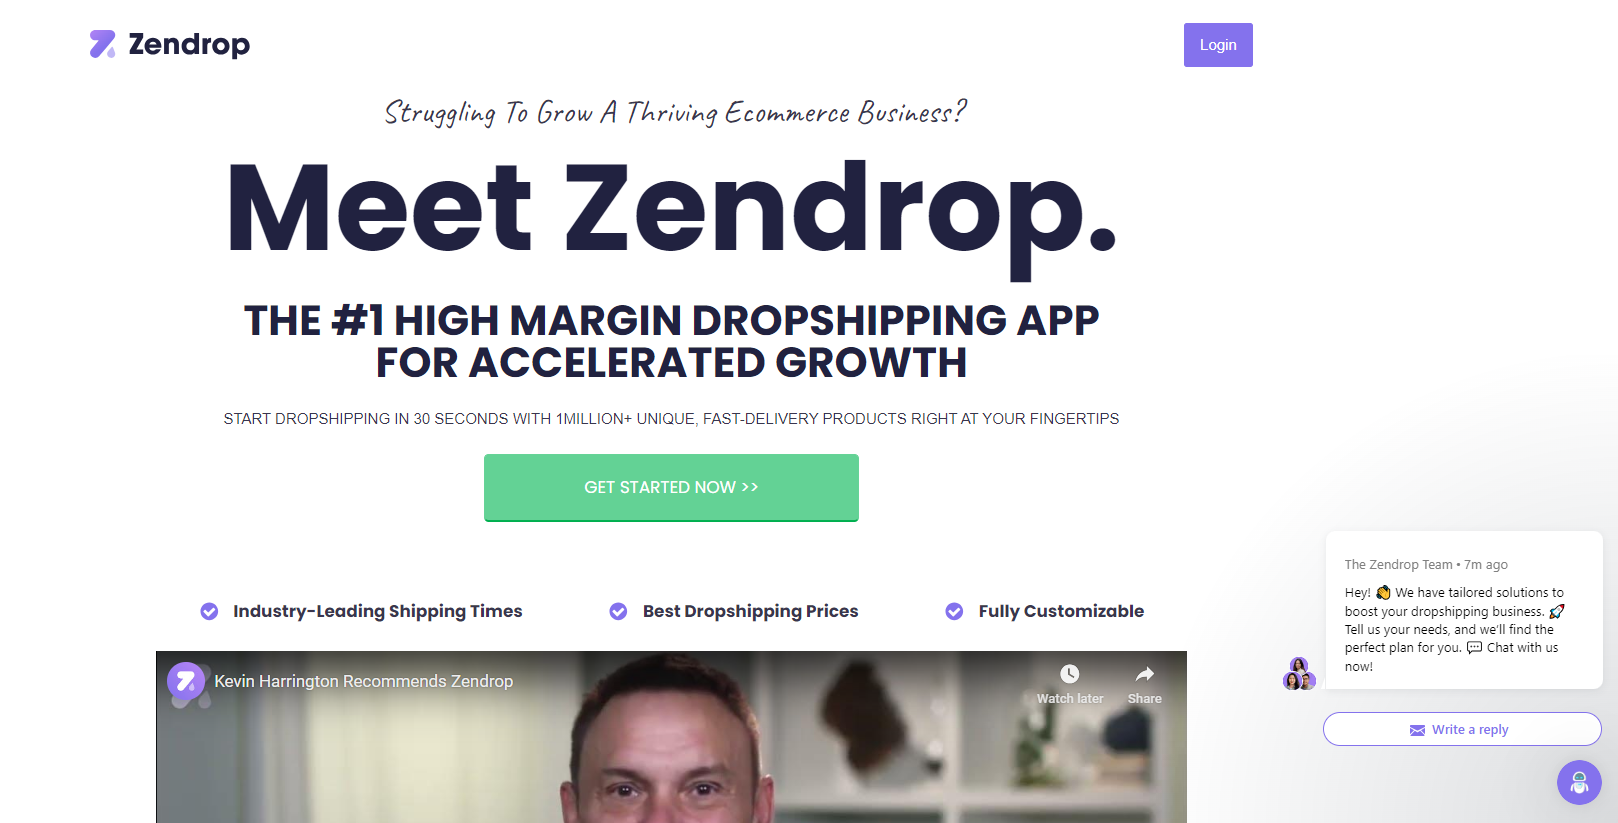 Zendrop is an excellent platform for those looking to start a private label dropshipping business.